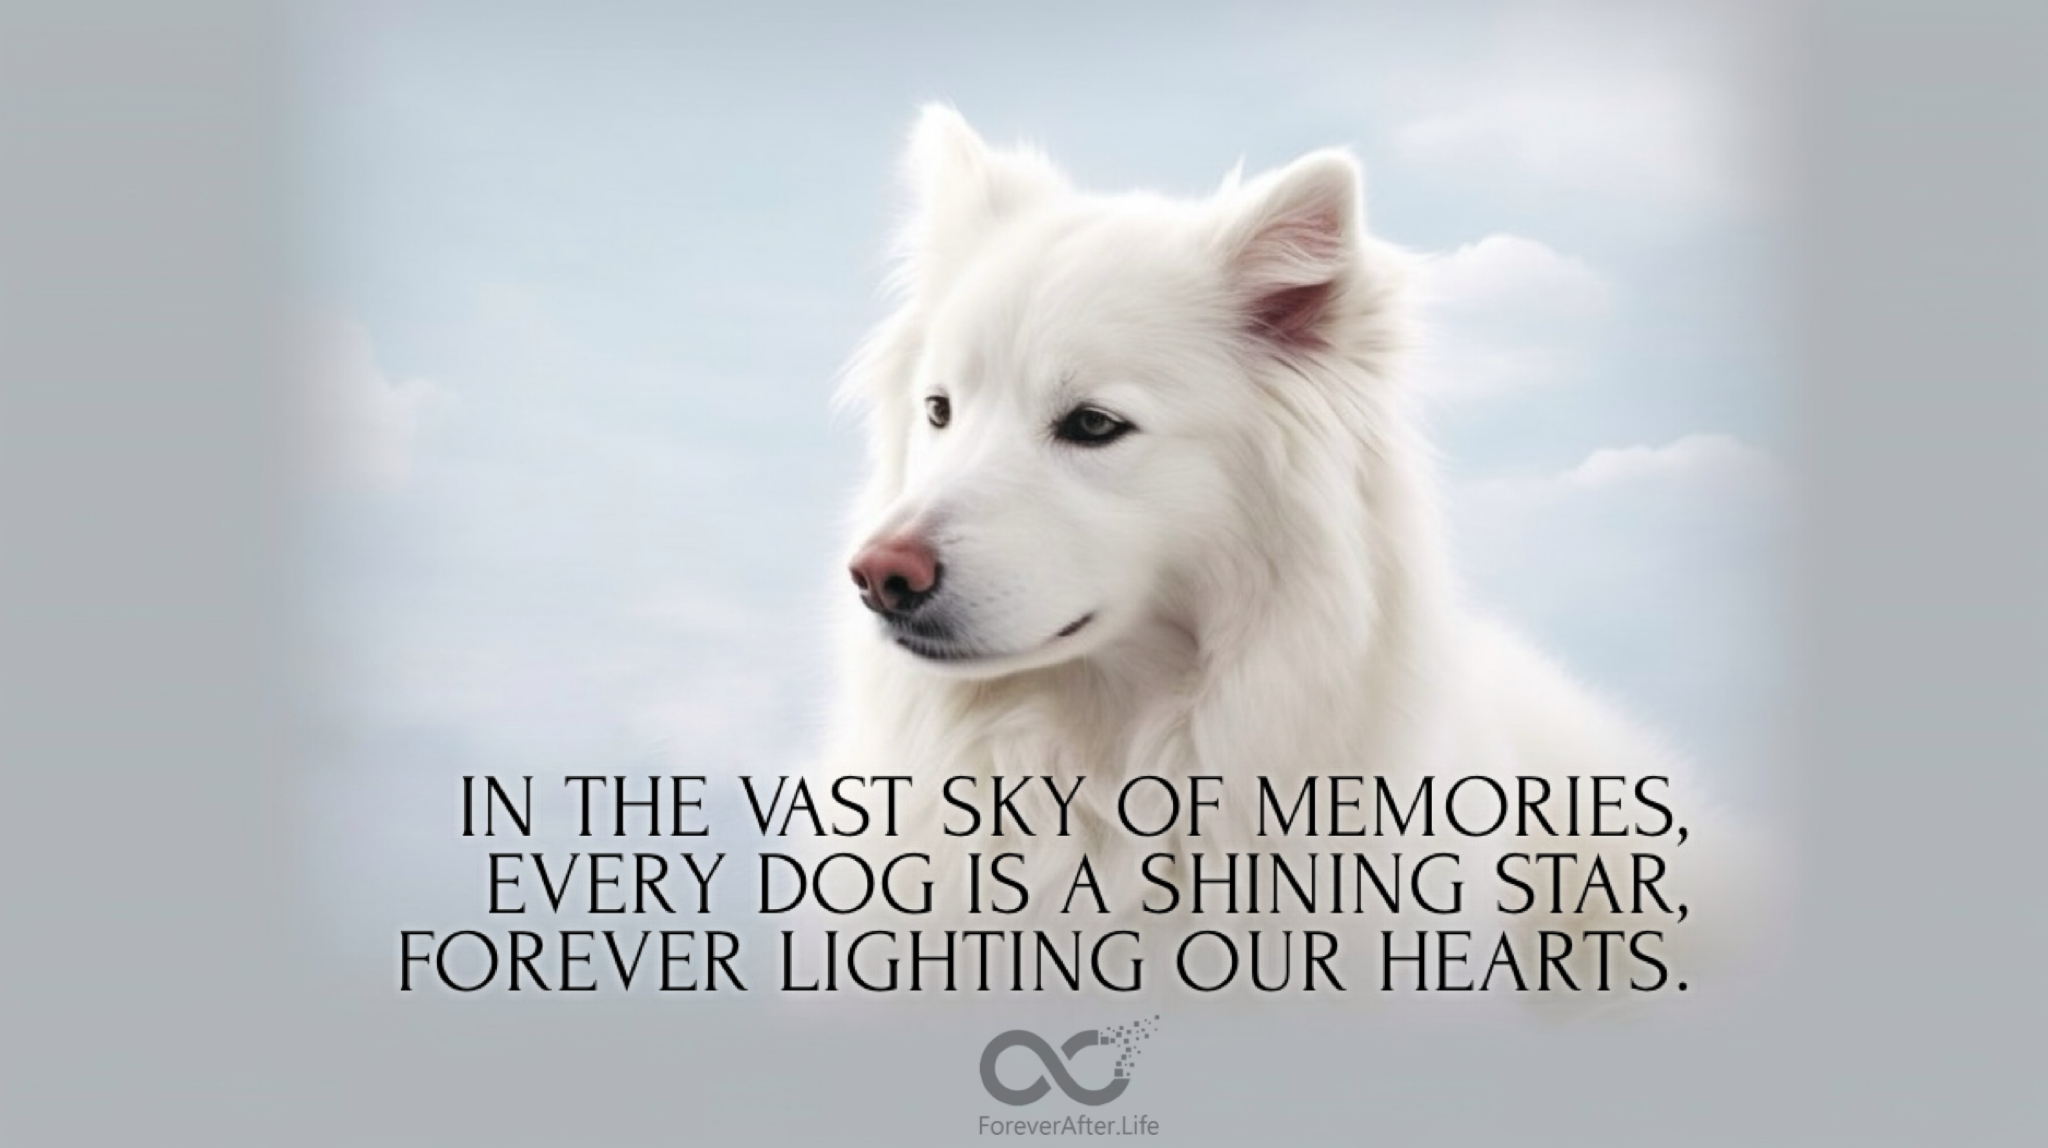 In the vast sky of memories, every dog is a shining star, forever lighting our hearts